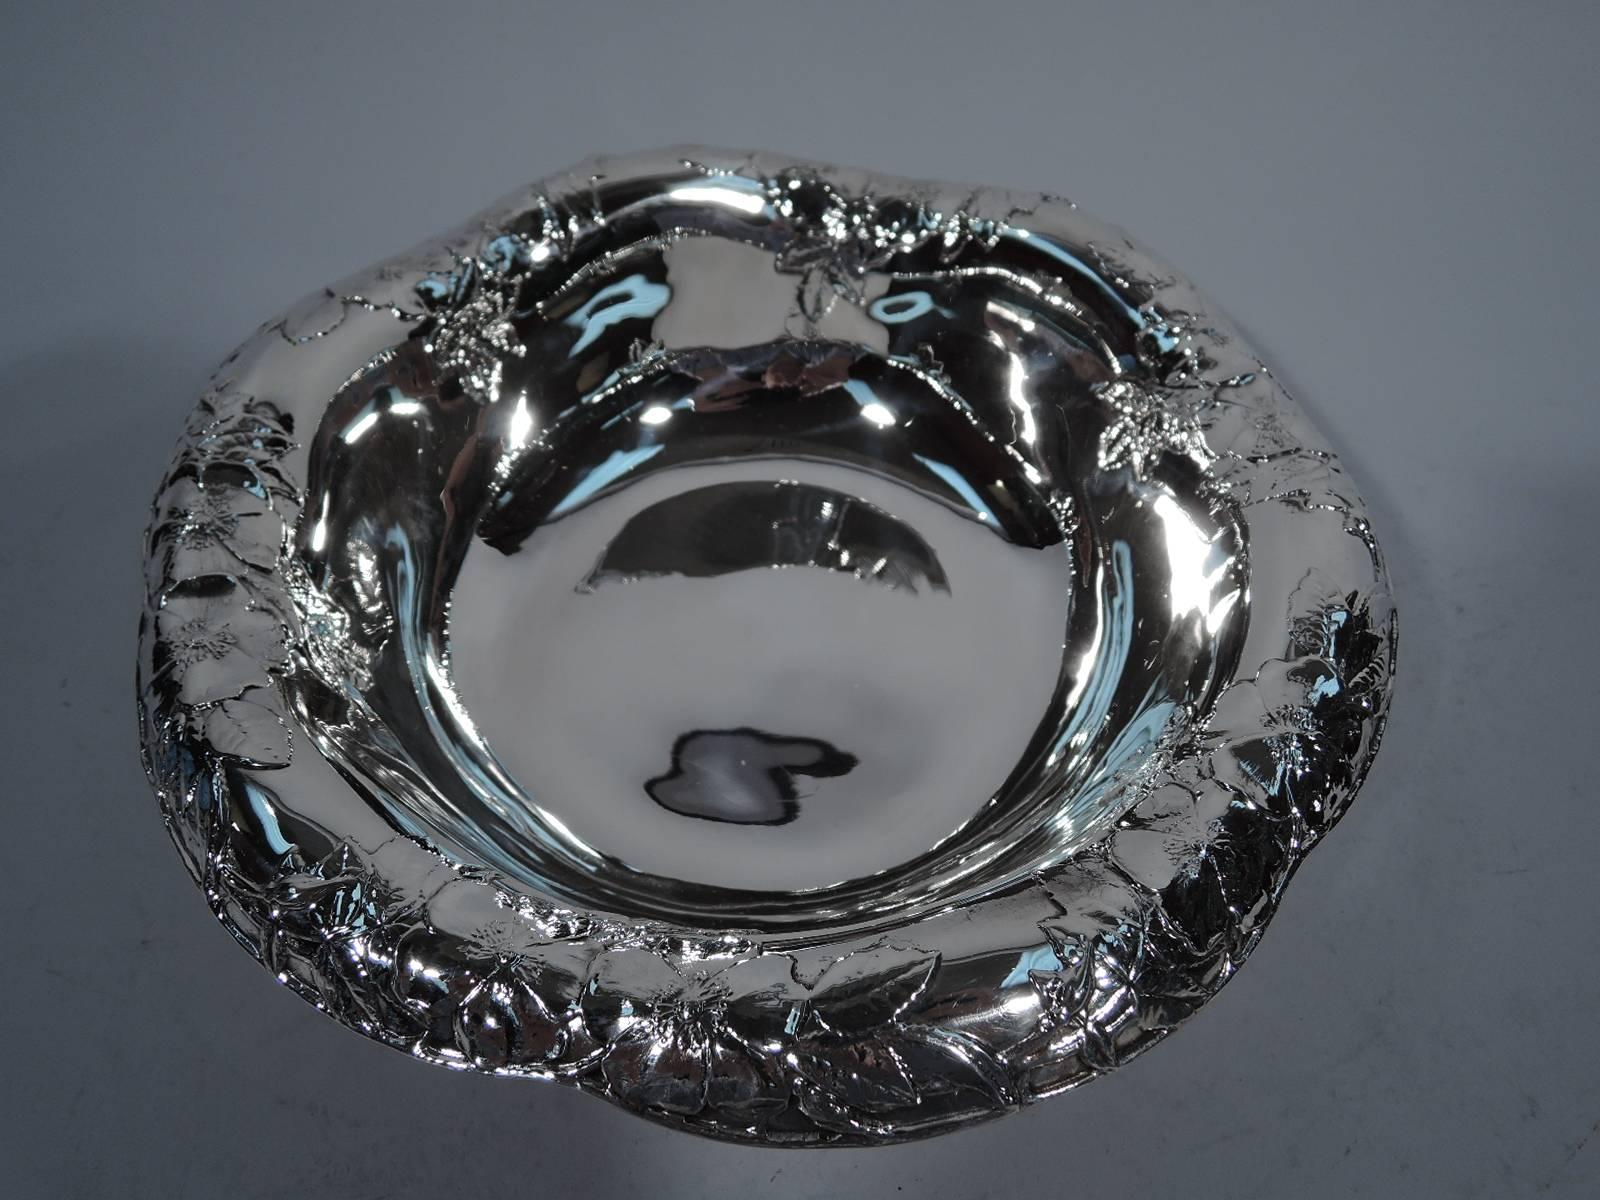 Sterling silver bowl. Made by Tiffany & Co. in New York, circa 1907. Curved sides and wavy and scrolled turned-down rim with applied blossoms. Pretty. Hallmark includes pattern no. 16858E (first produced in 1907) and director's letter m (1907-47).